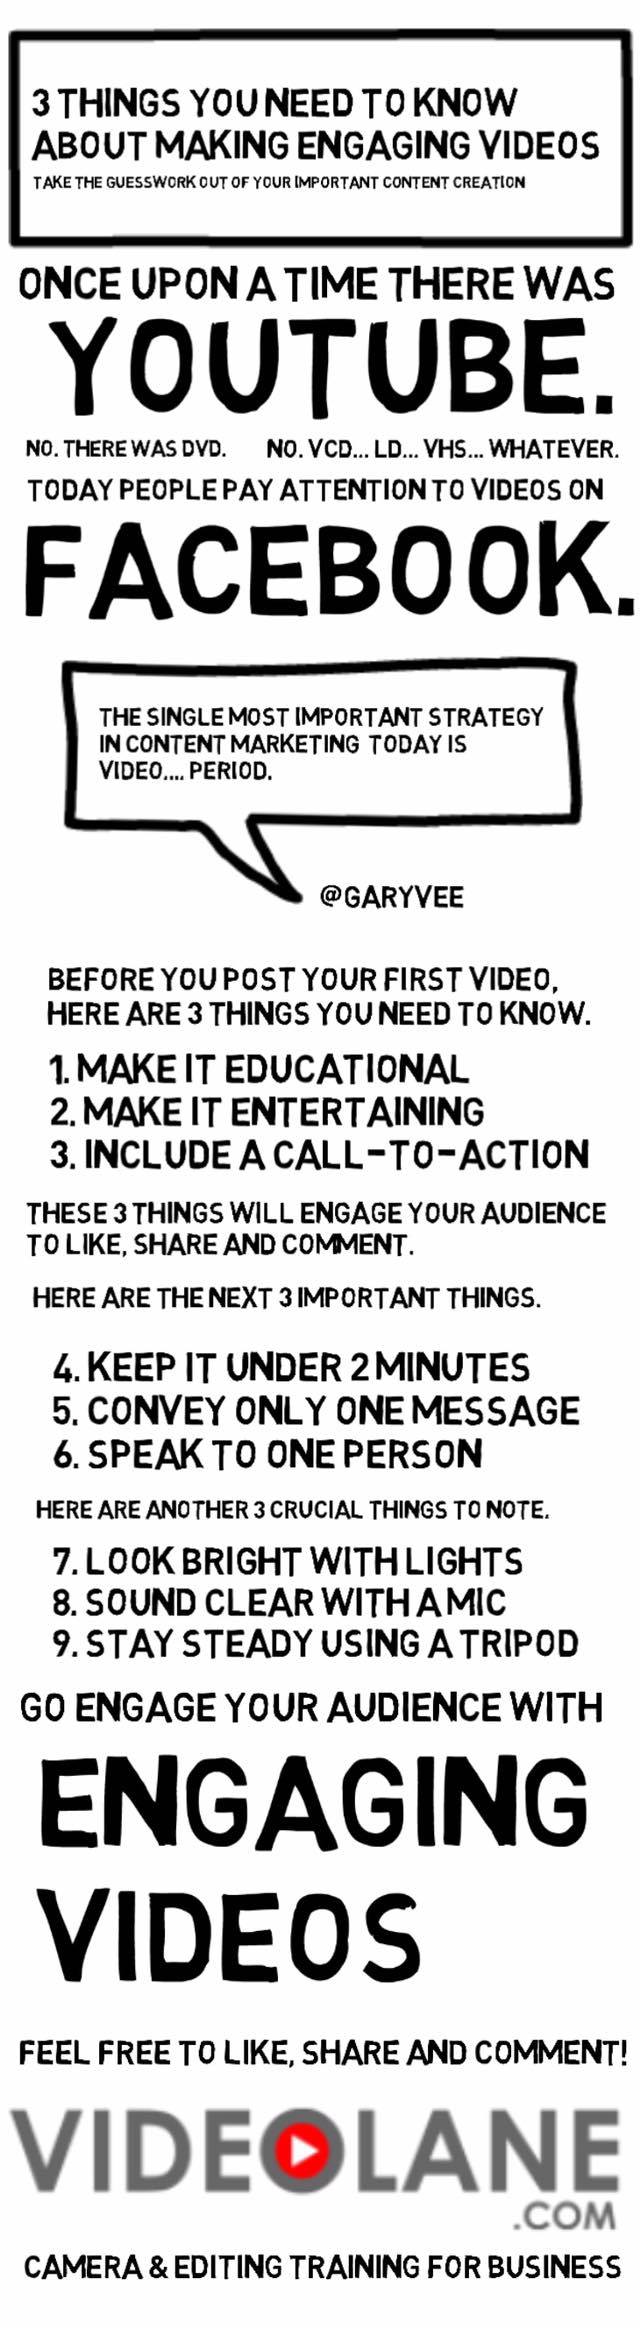 3 Things You Need to Know About Making Engaging Videos